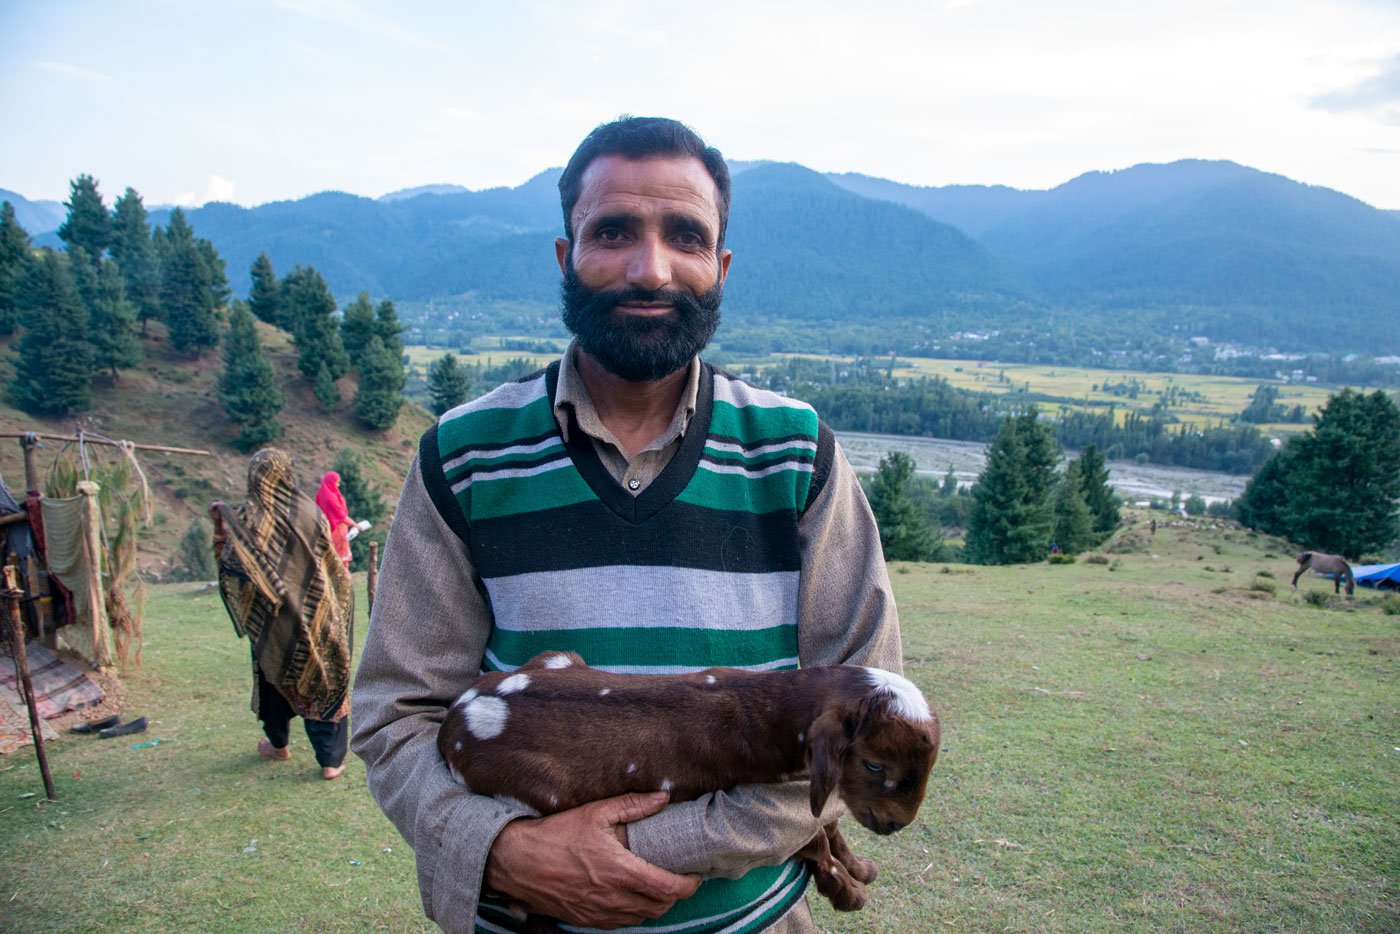 Mohammed Zabir on his way  back to Kathua near Jammu; his group is descending from the highland pastures in Kishtwar district of Kashmir